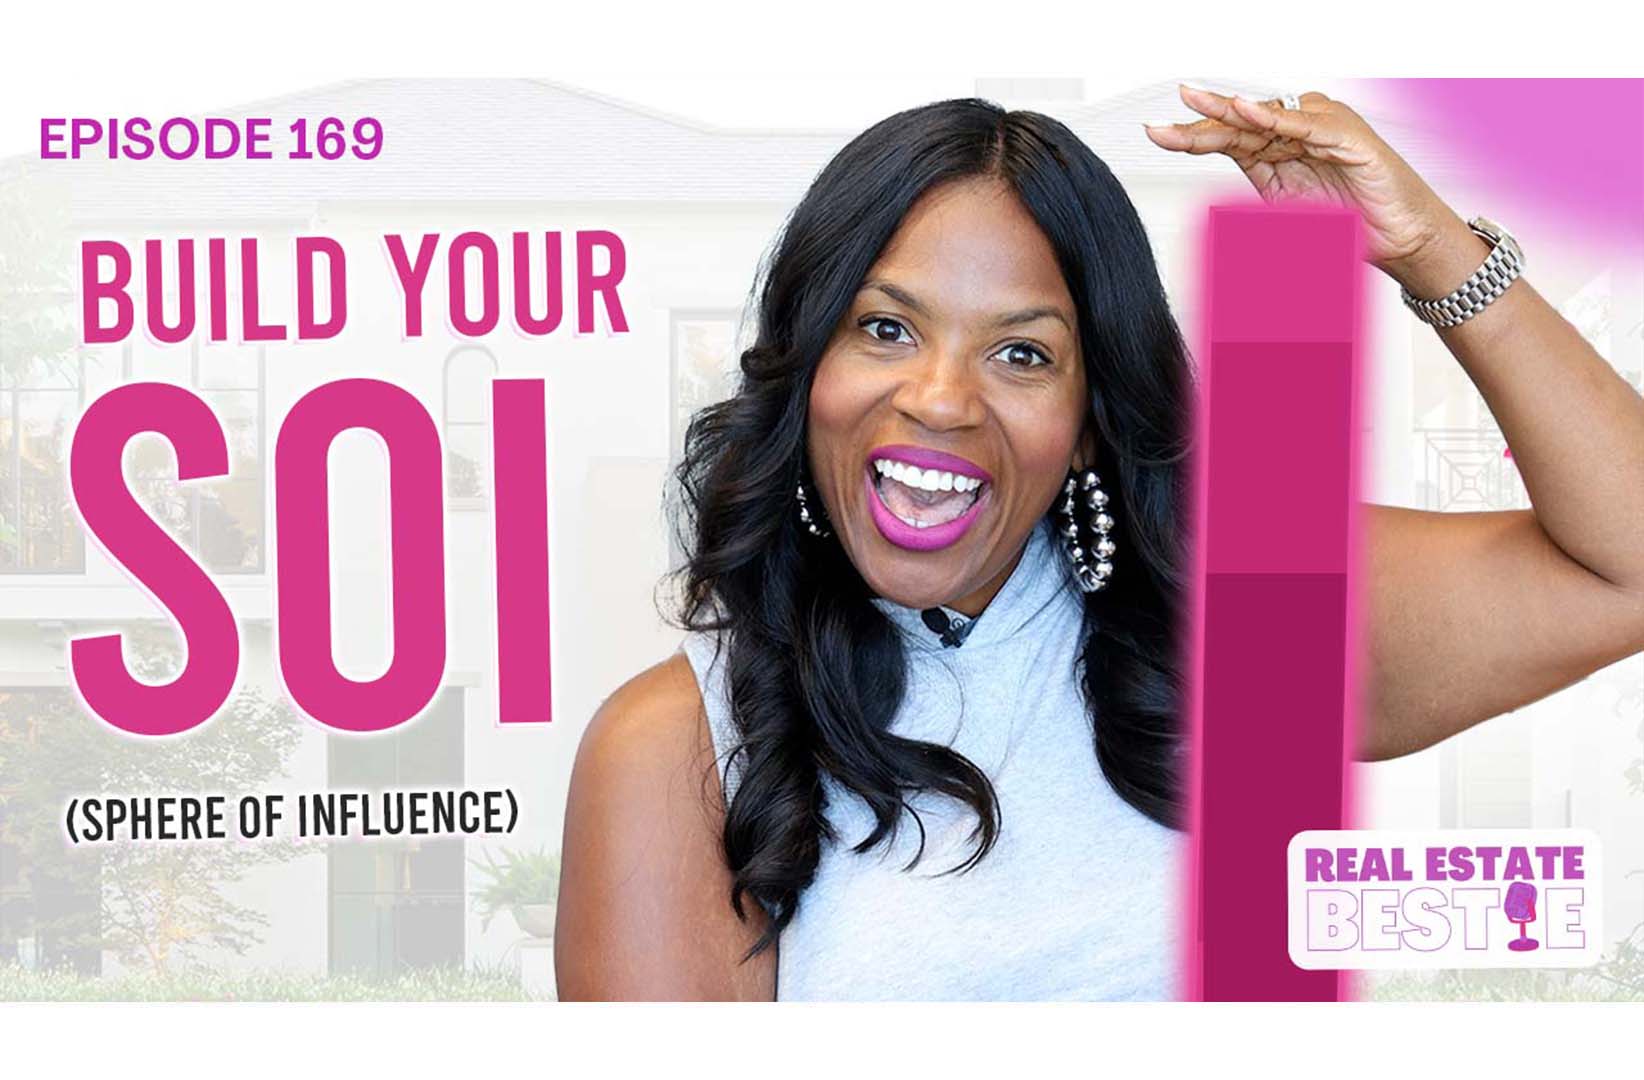 How do you build your SOI? - Real Estate Bestie Podcast - Rosemary Lewis